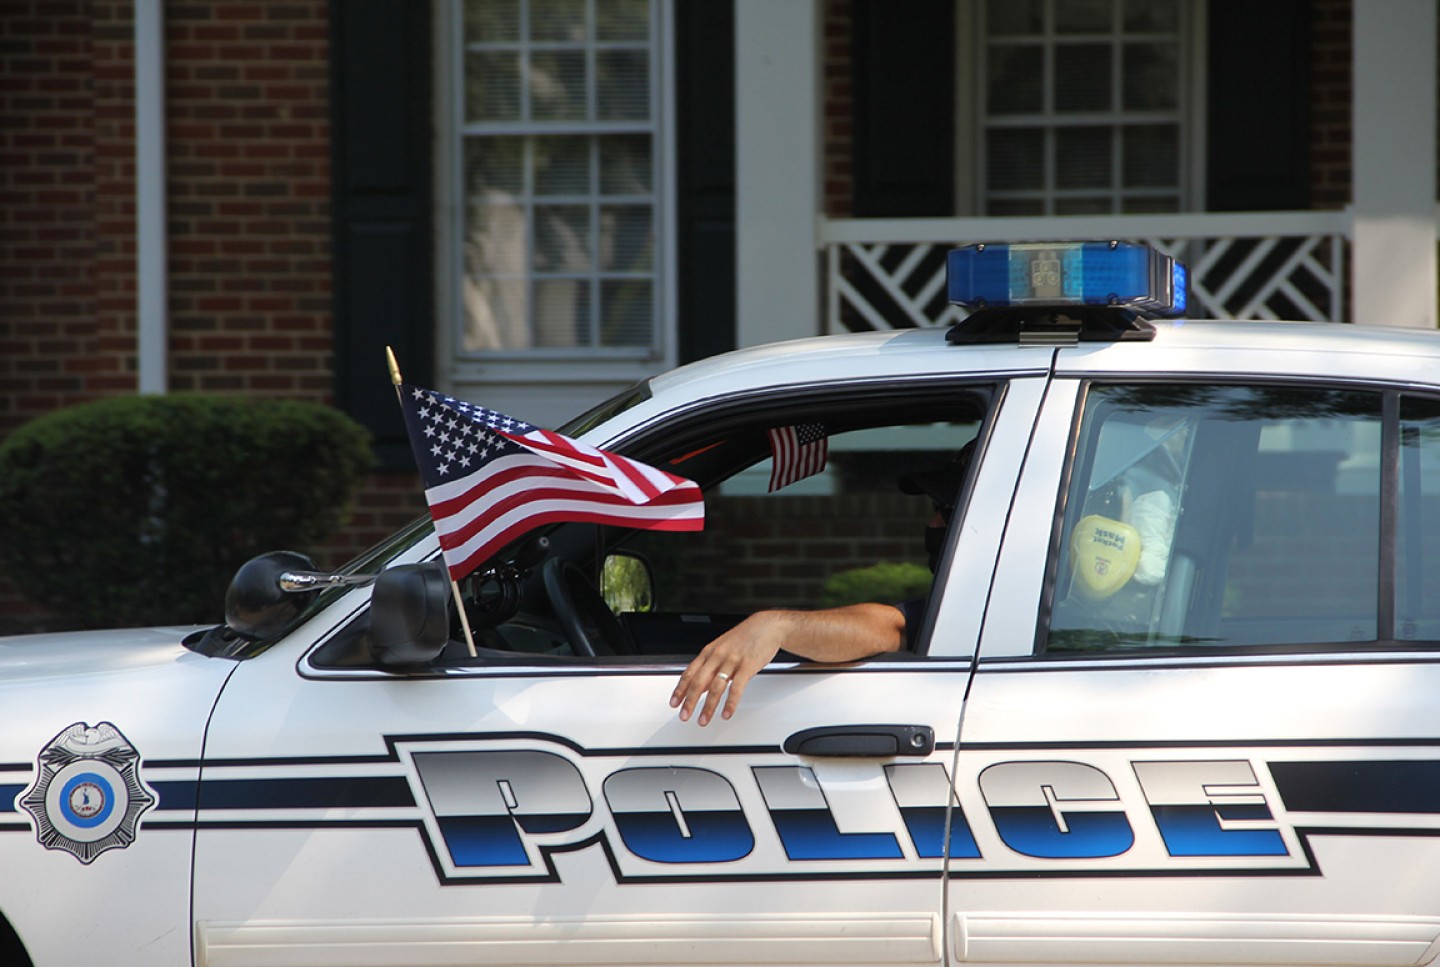 police-car-with-the-united-states-flag-during-a-ju-2021-09-03-19-52-08-utc